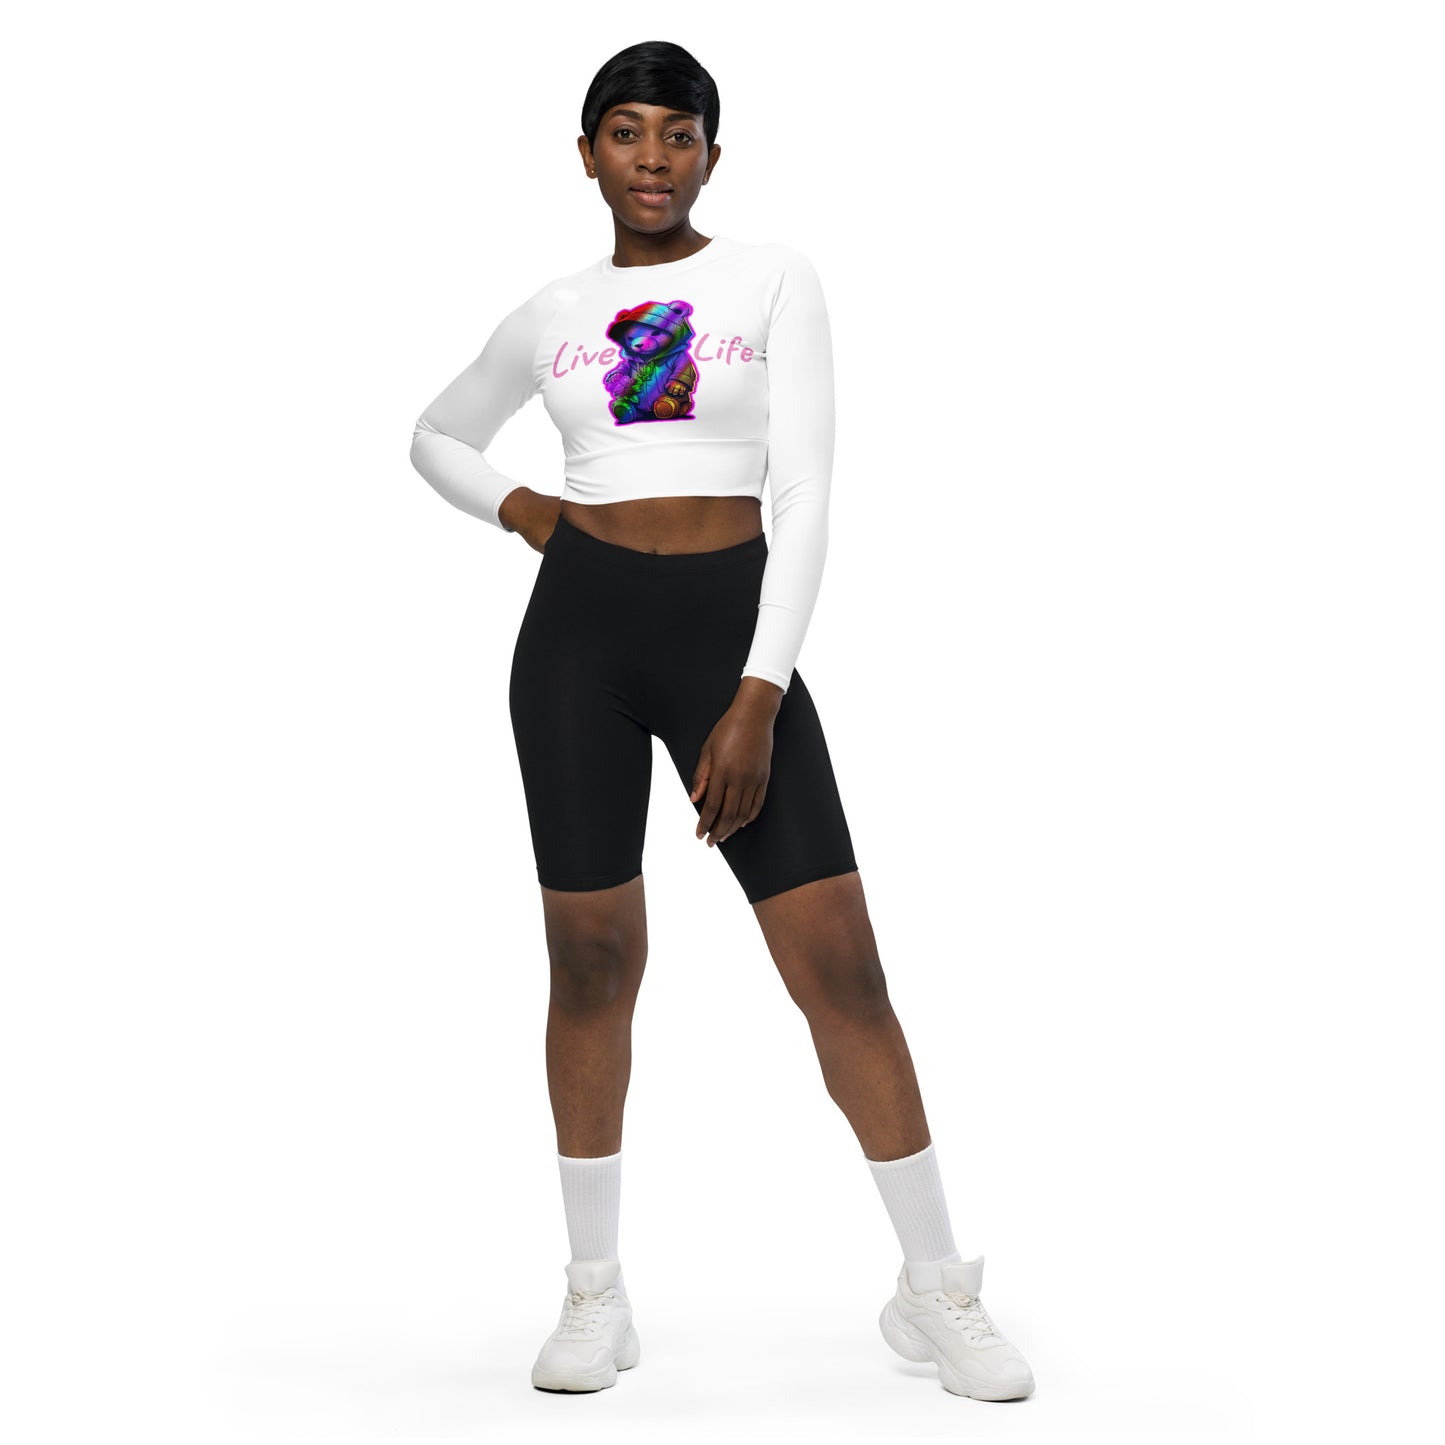 Knqv "Live Life | Recycled long-sleeve crop top